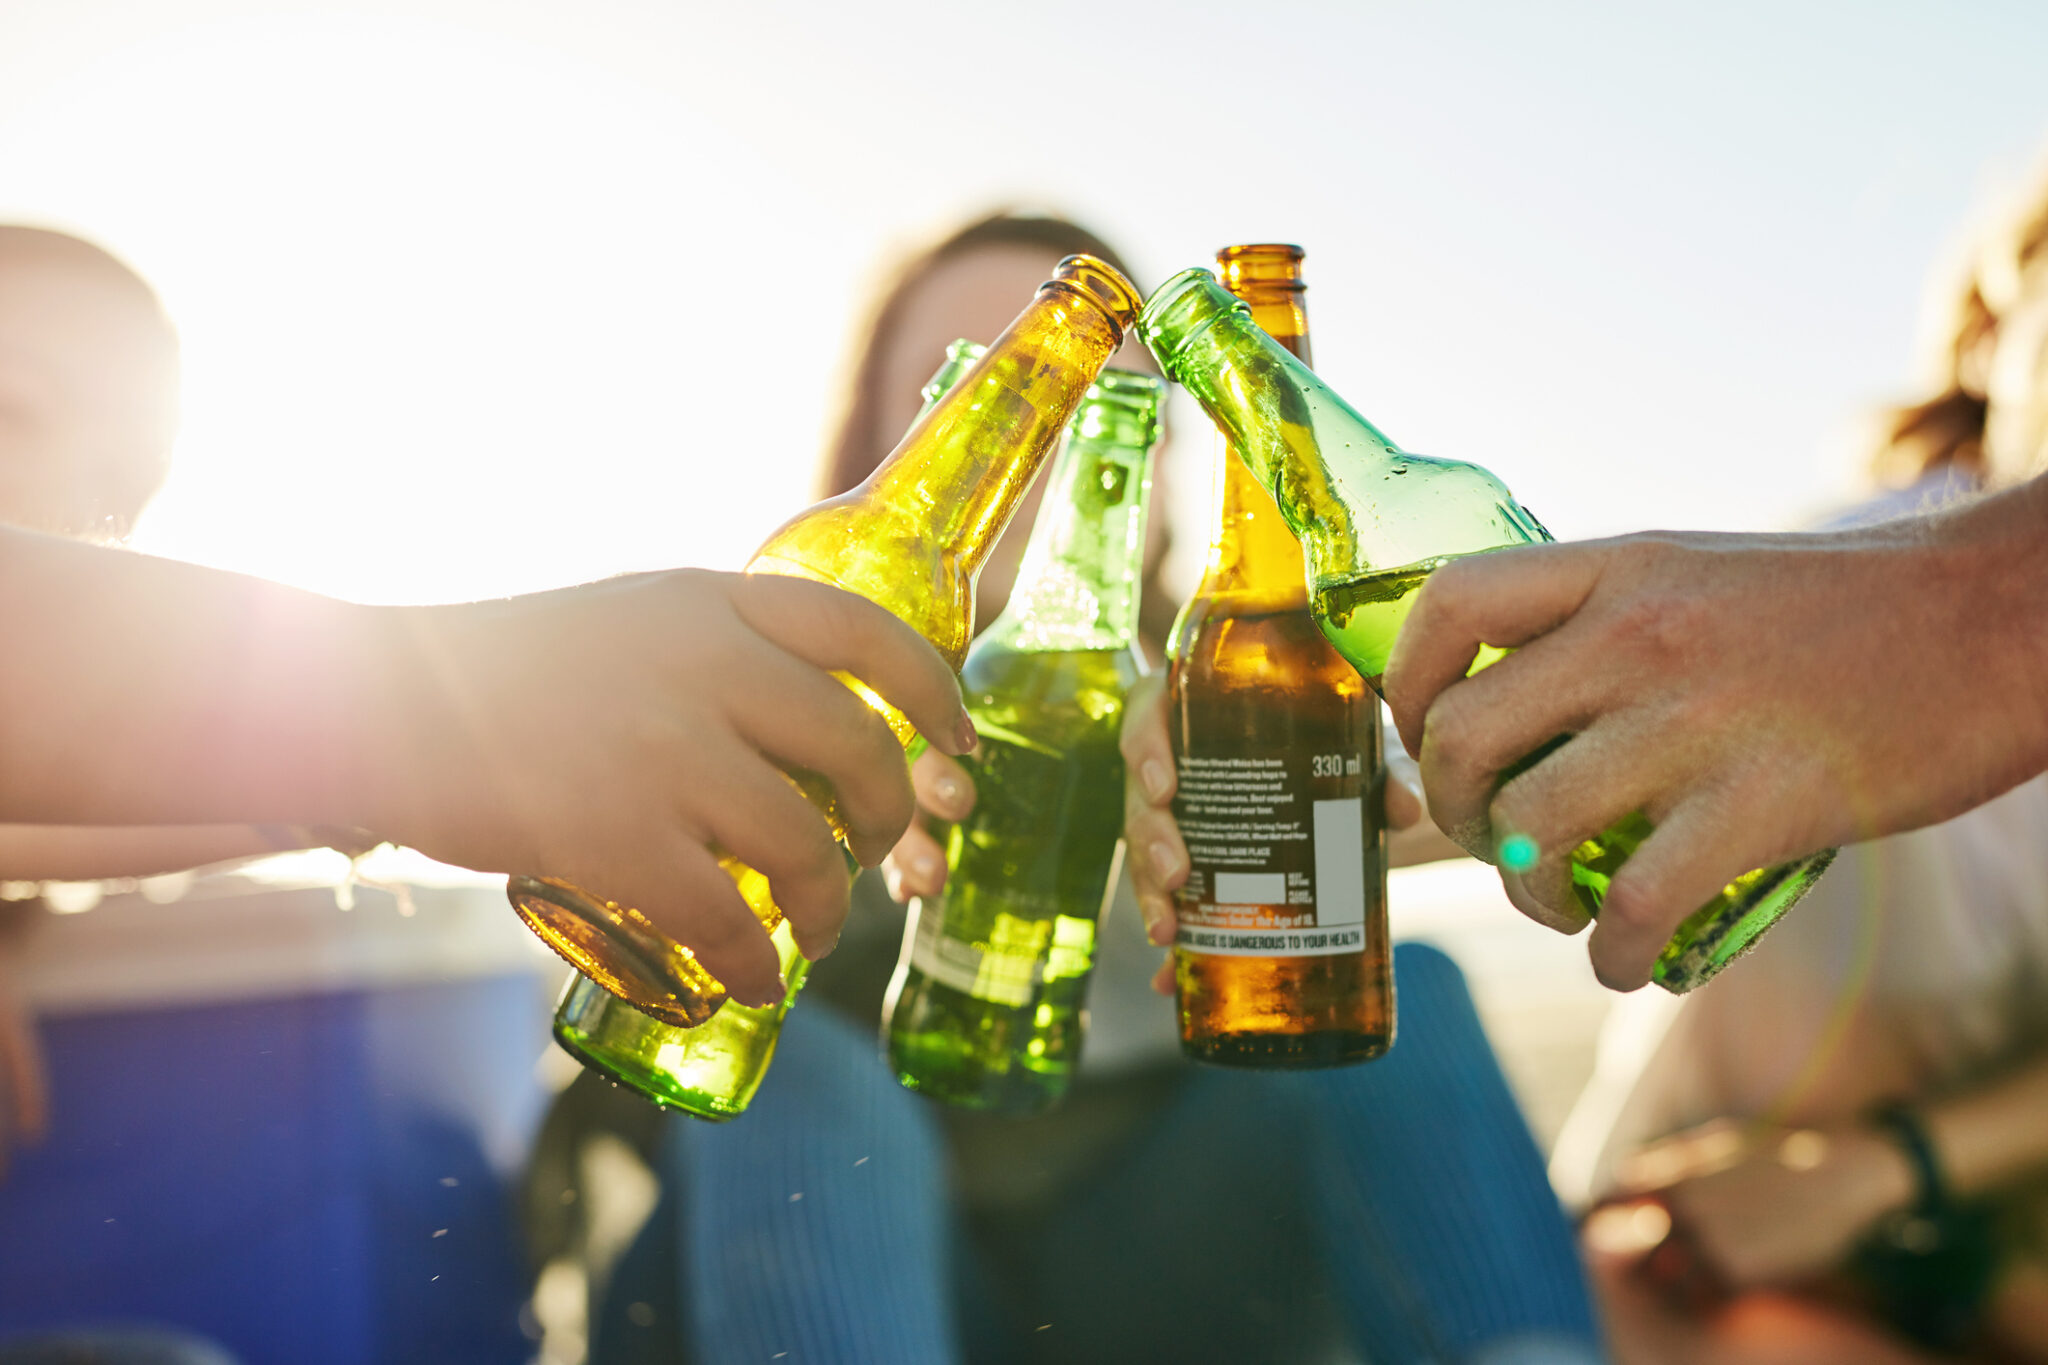 ‘Pregaming’ Linked to Risky Substance Use Among College Students